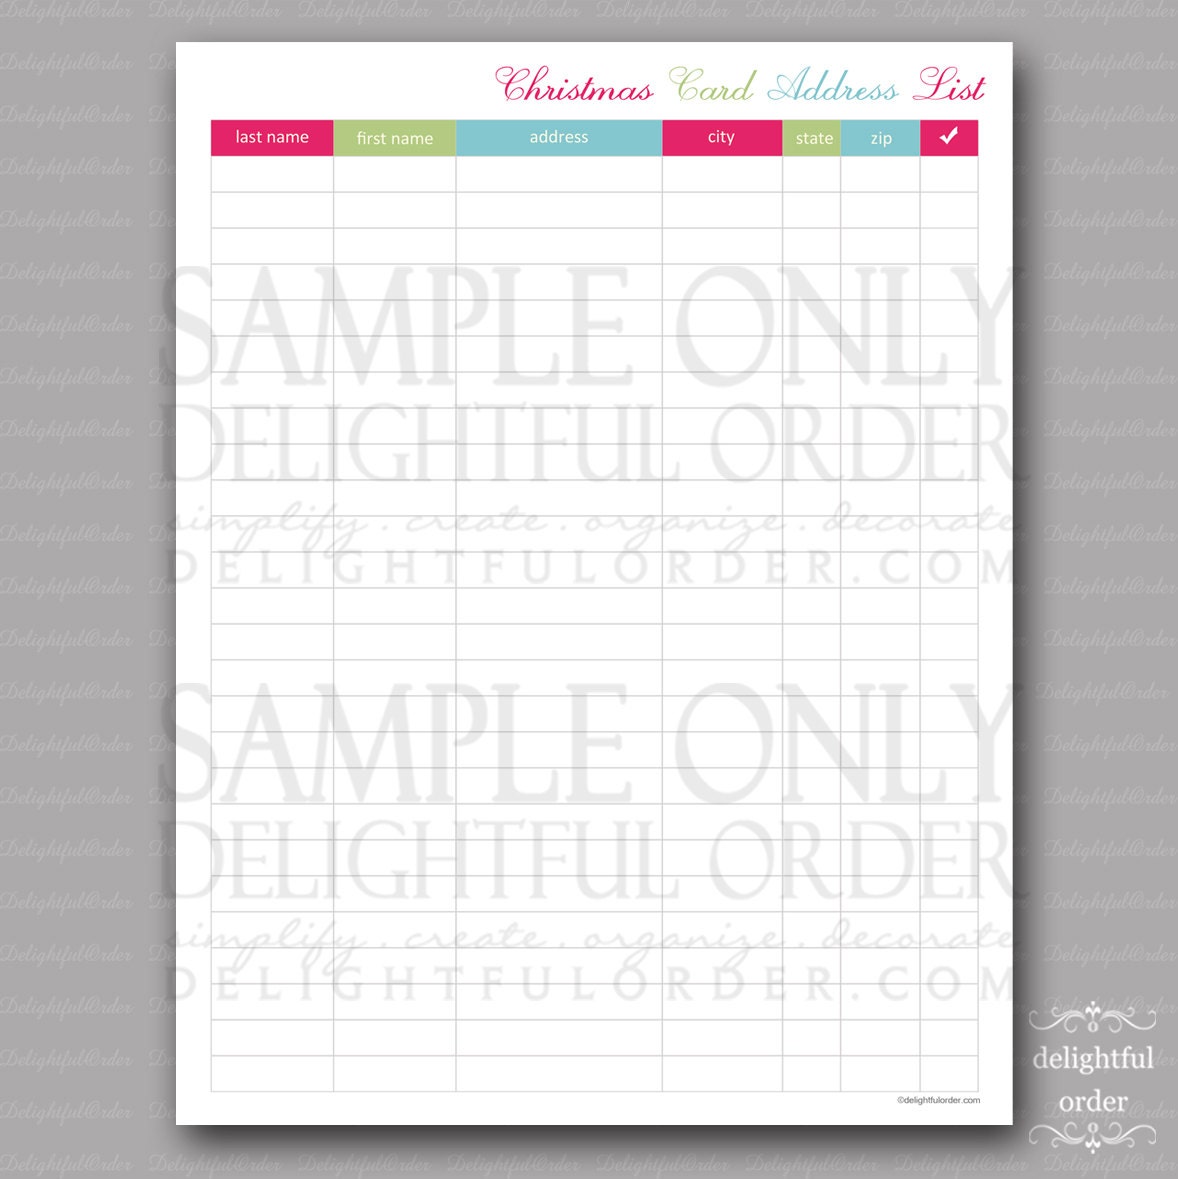 5-best-images-of-printable-list-christmas-card-templates-printable-christmas-card-address-list